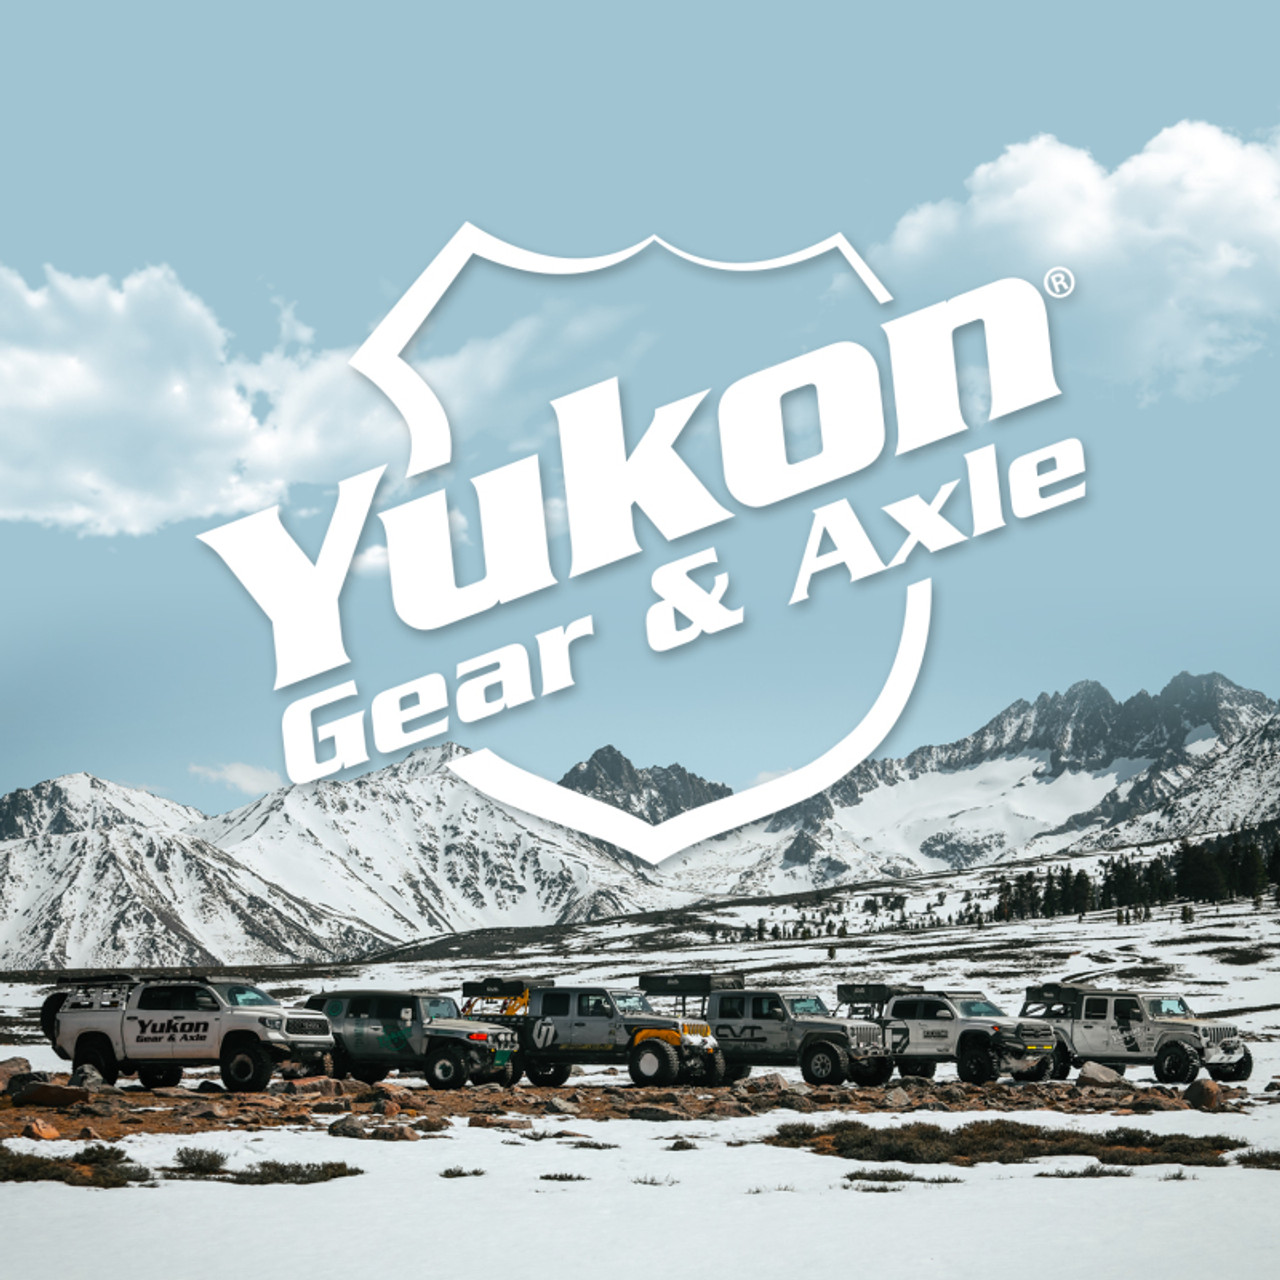 Yukon Gear Dropout Assembly for Ford 9in Differential w/ Grizzly Locker 31 Spline 3.50 Ratio - YDAF9-350YGL-31 Photo - lifestyle view